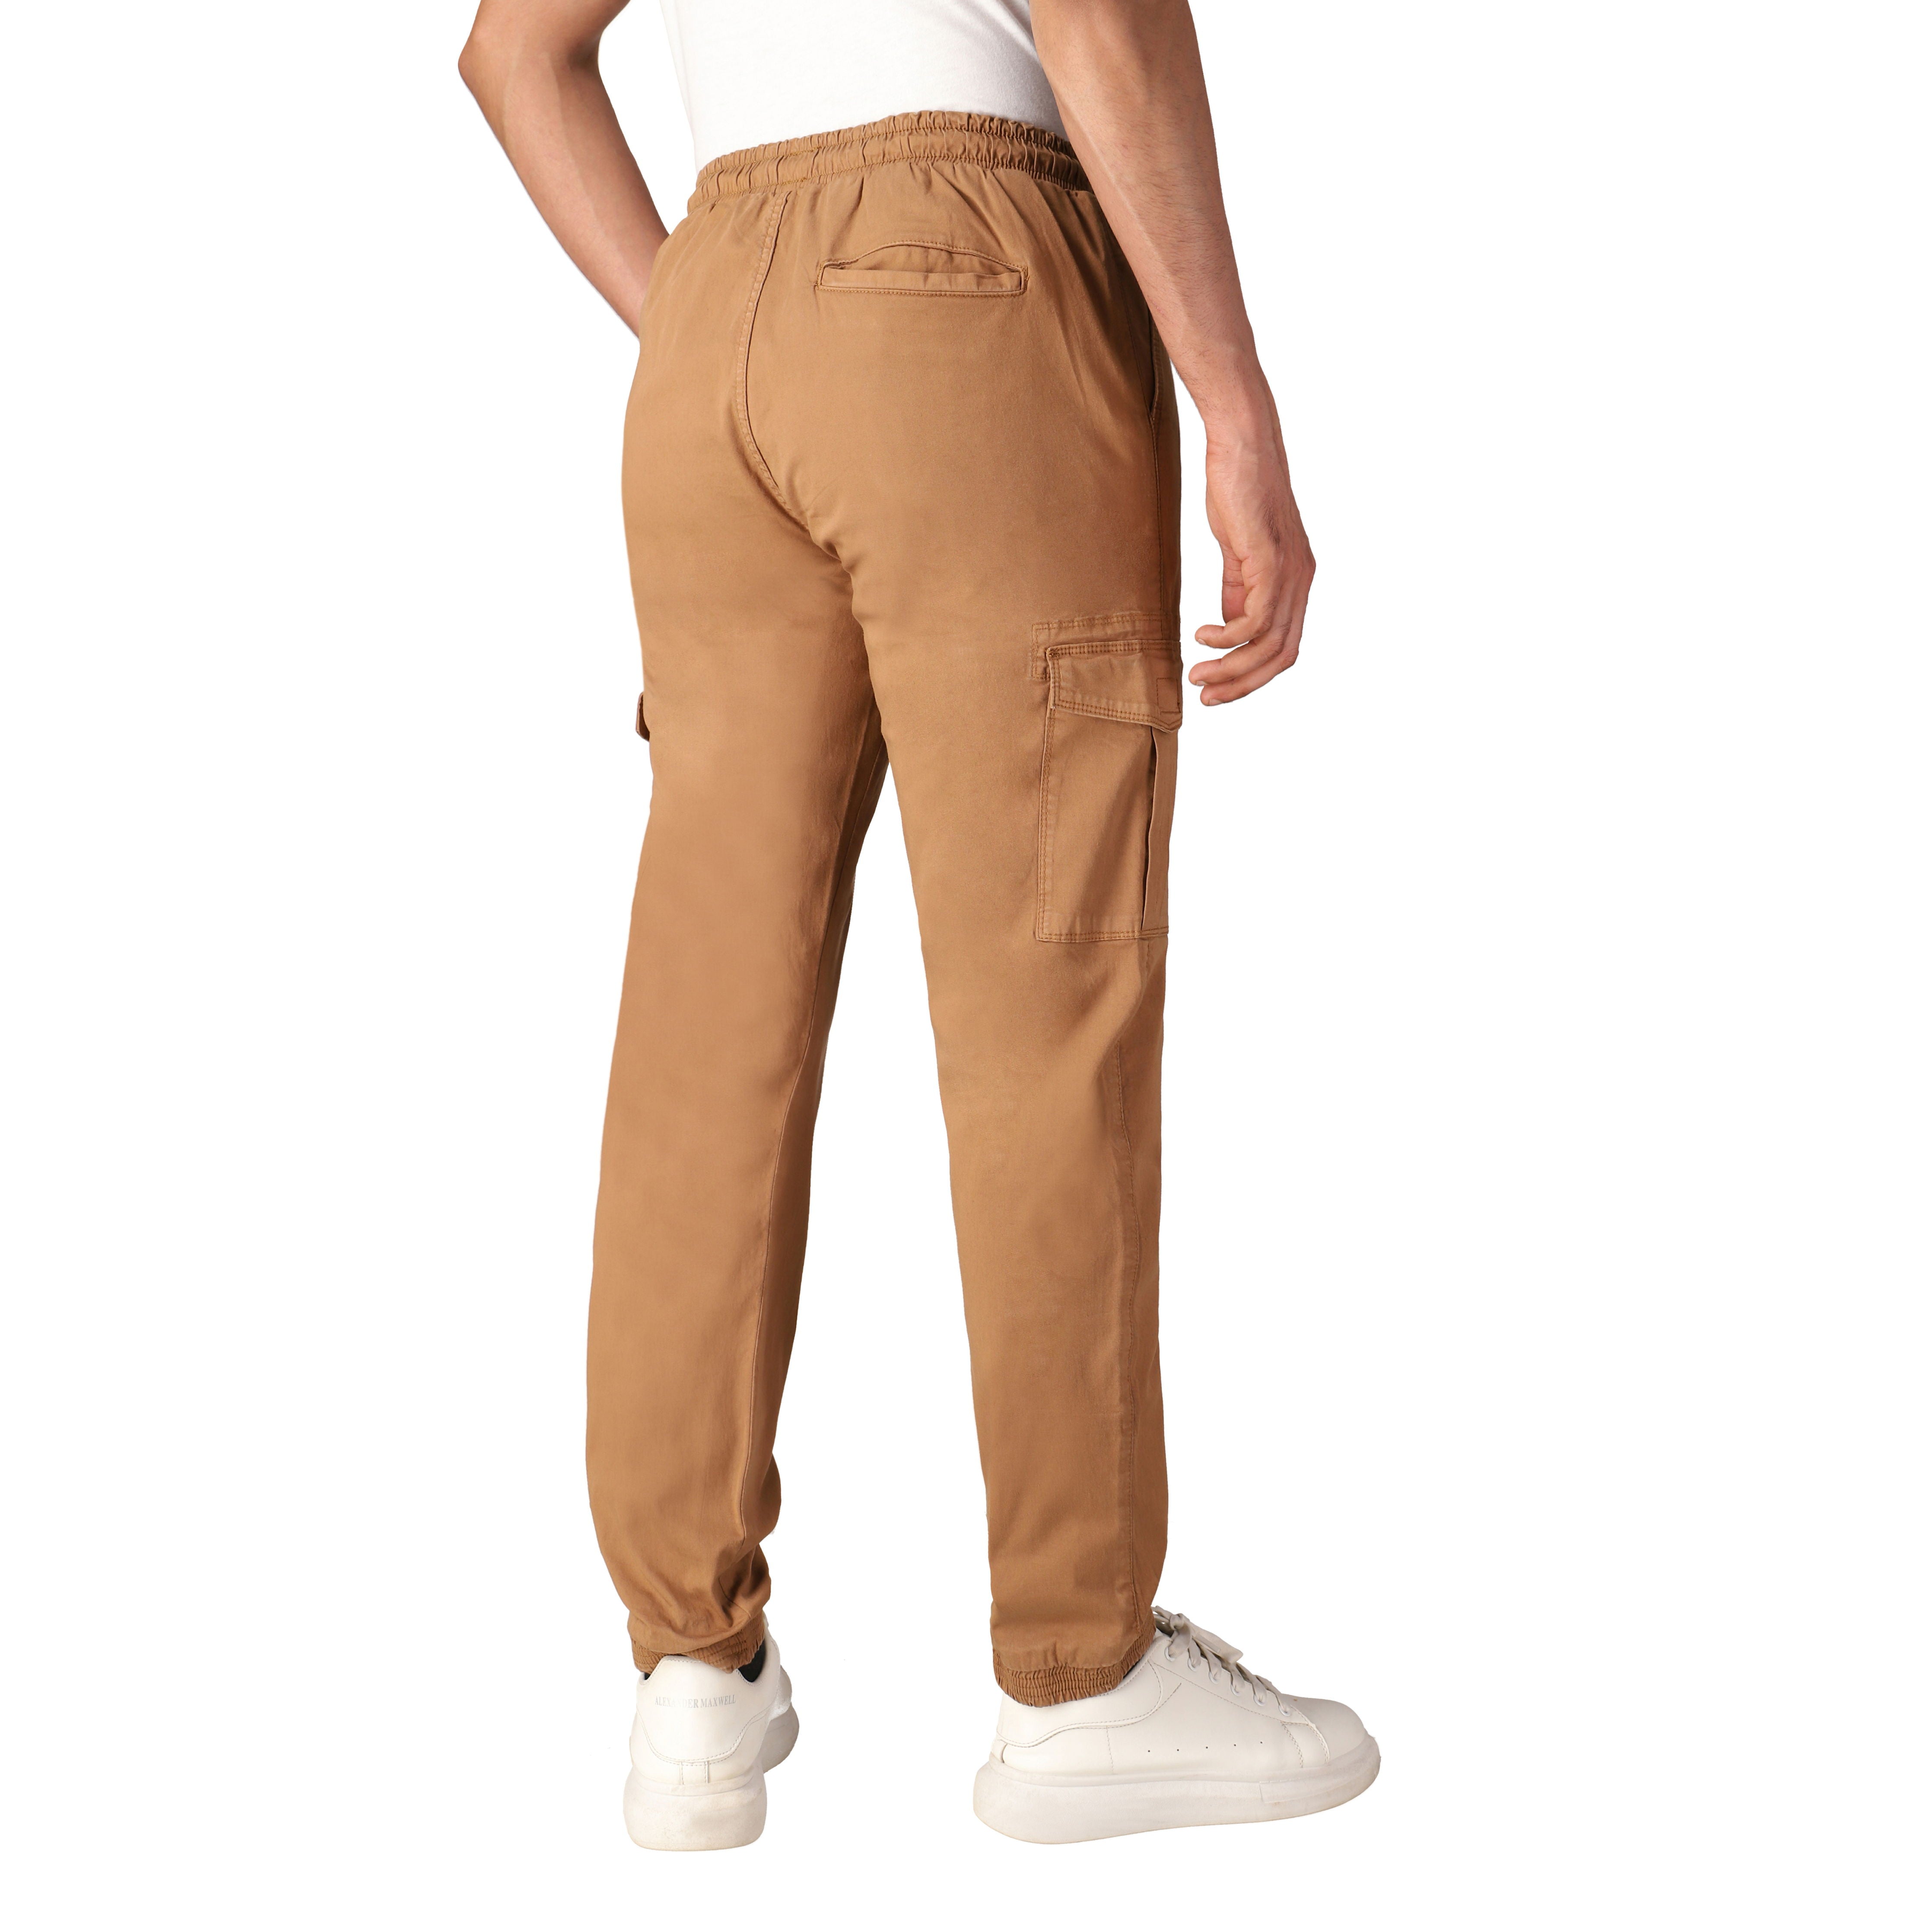 Urban Outfitters Without Walls Cargo Pocket Jogger, $64